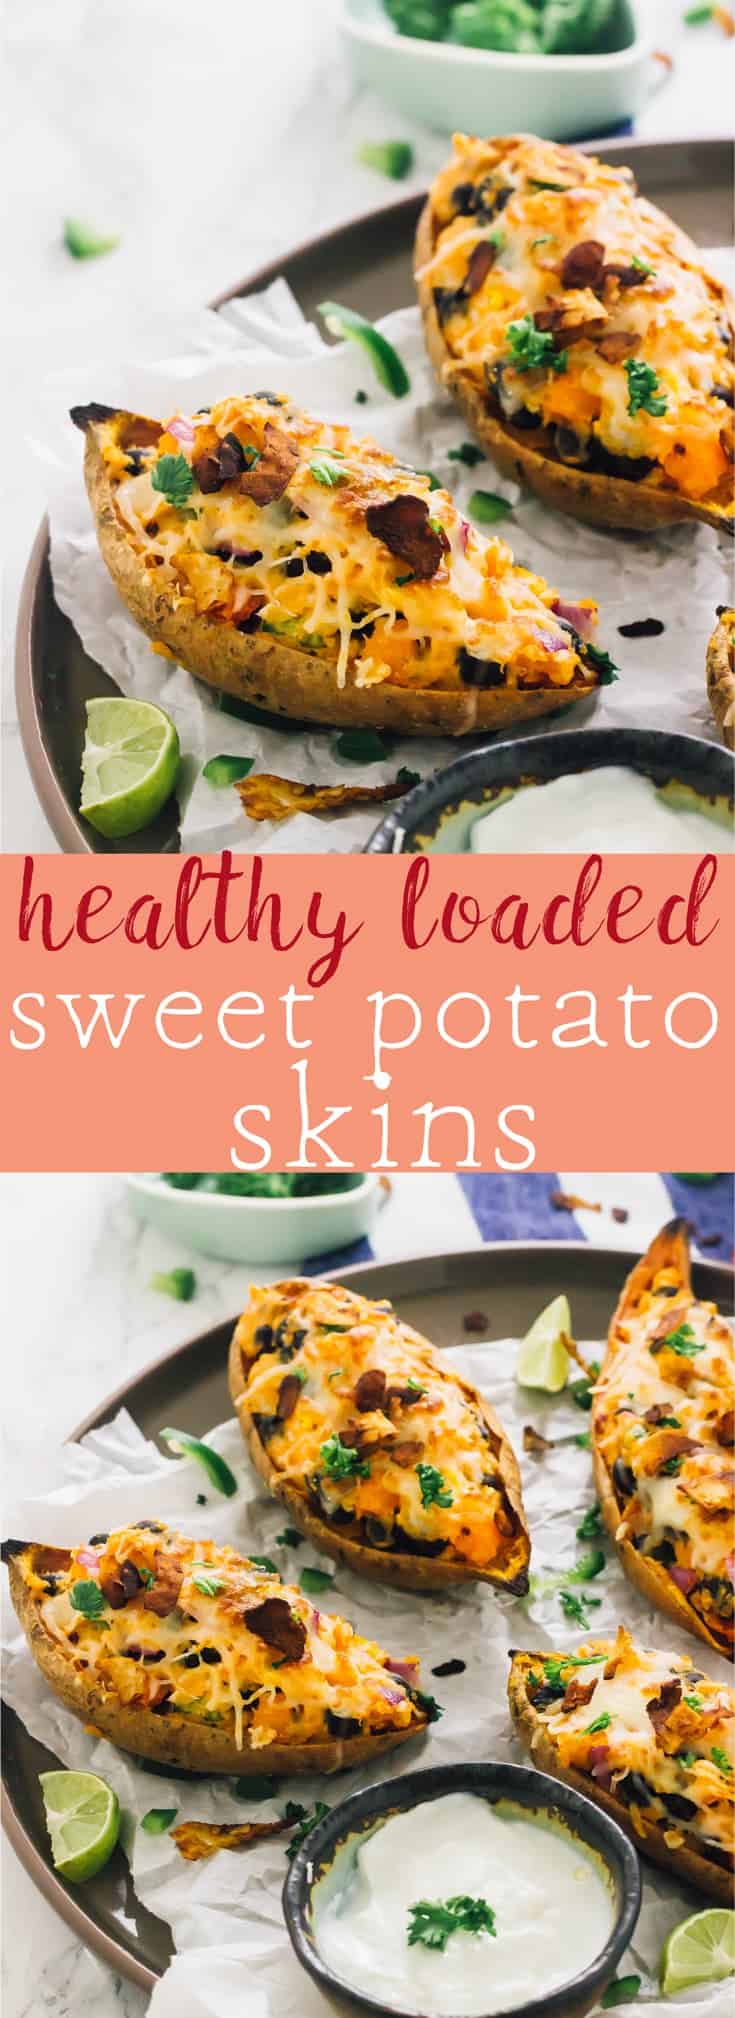 These Healthy Loaded Sweet Potato Skins are crispy, packed with 6g of protein, only 144 calories and still taste amazing! Guaranteed filling dinner or even party snack! via https://jessicainthekitchen.com